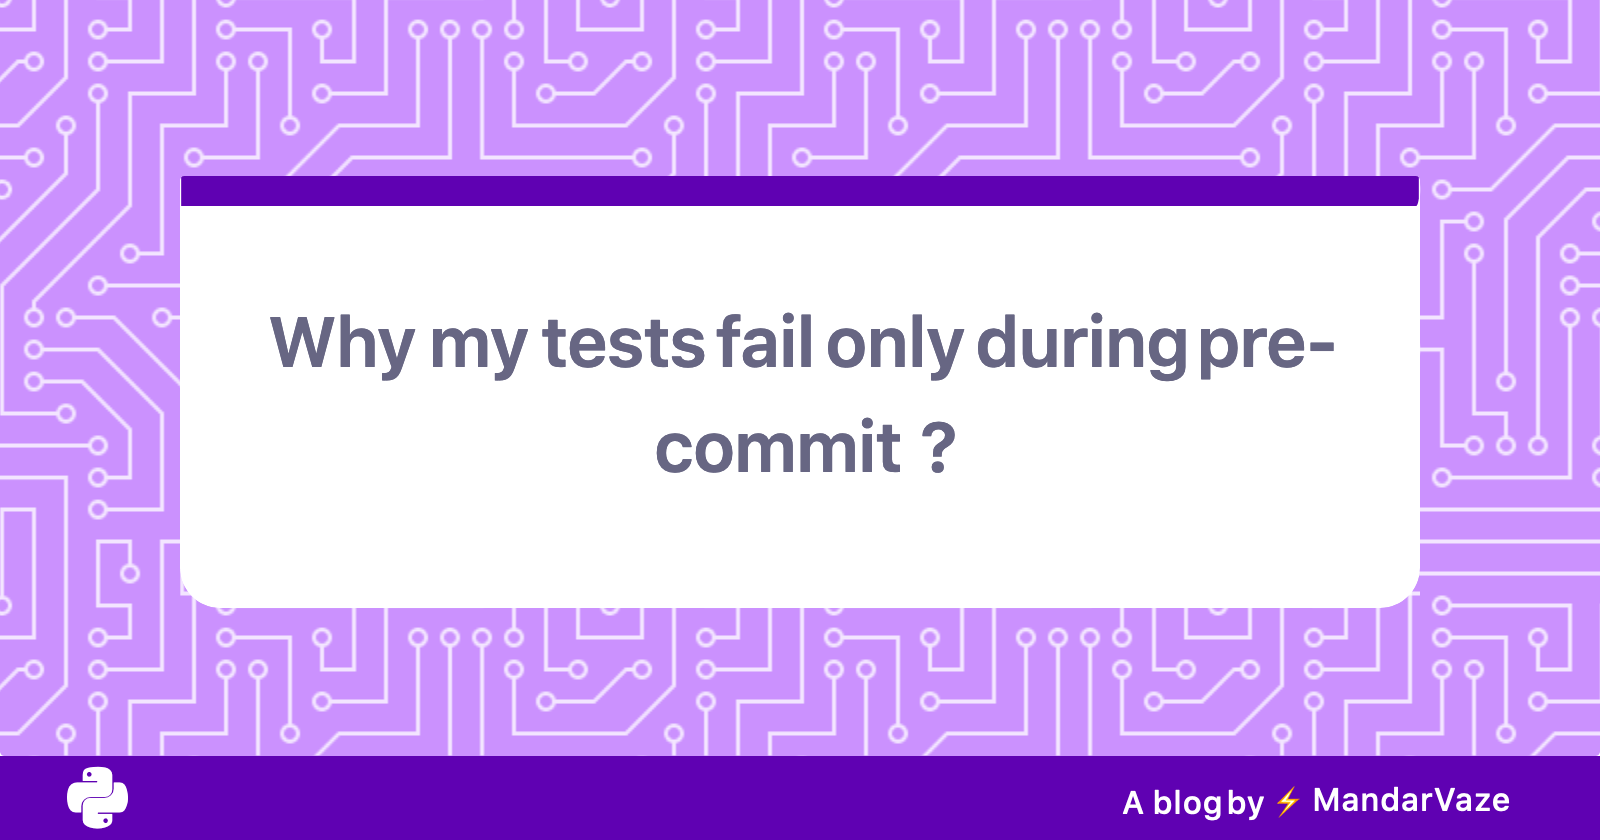 Why my tests fail only during pre-commit ?